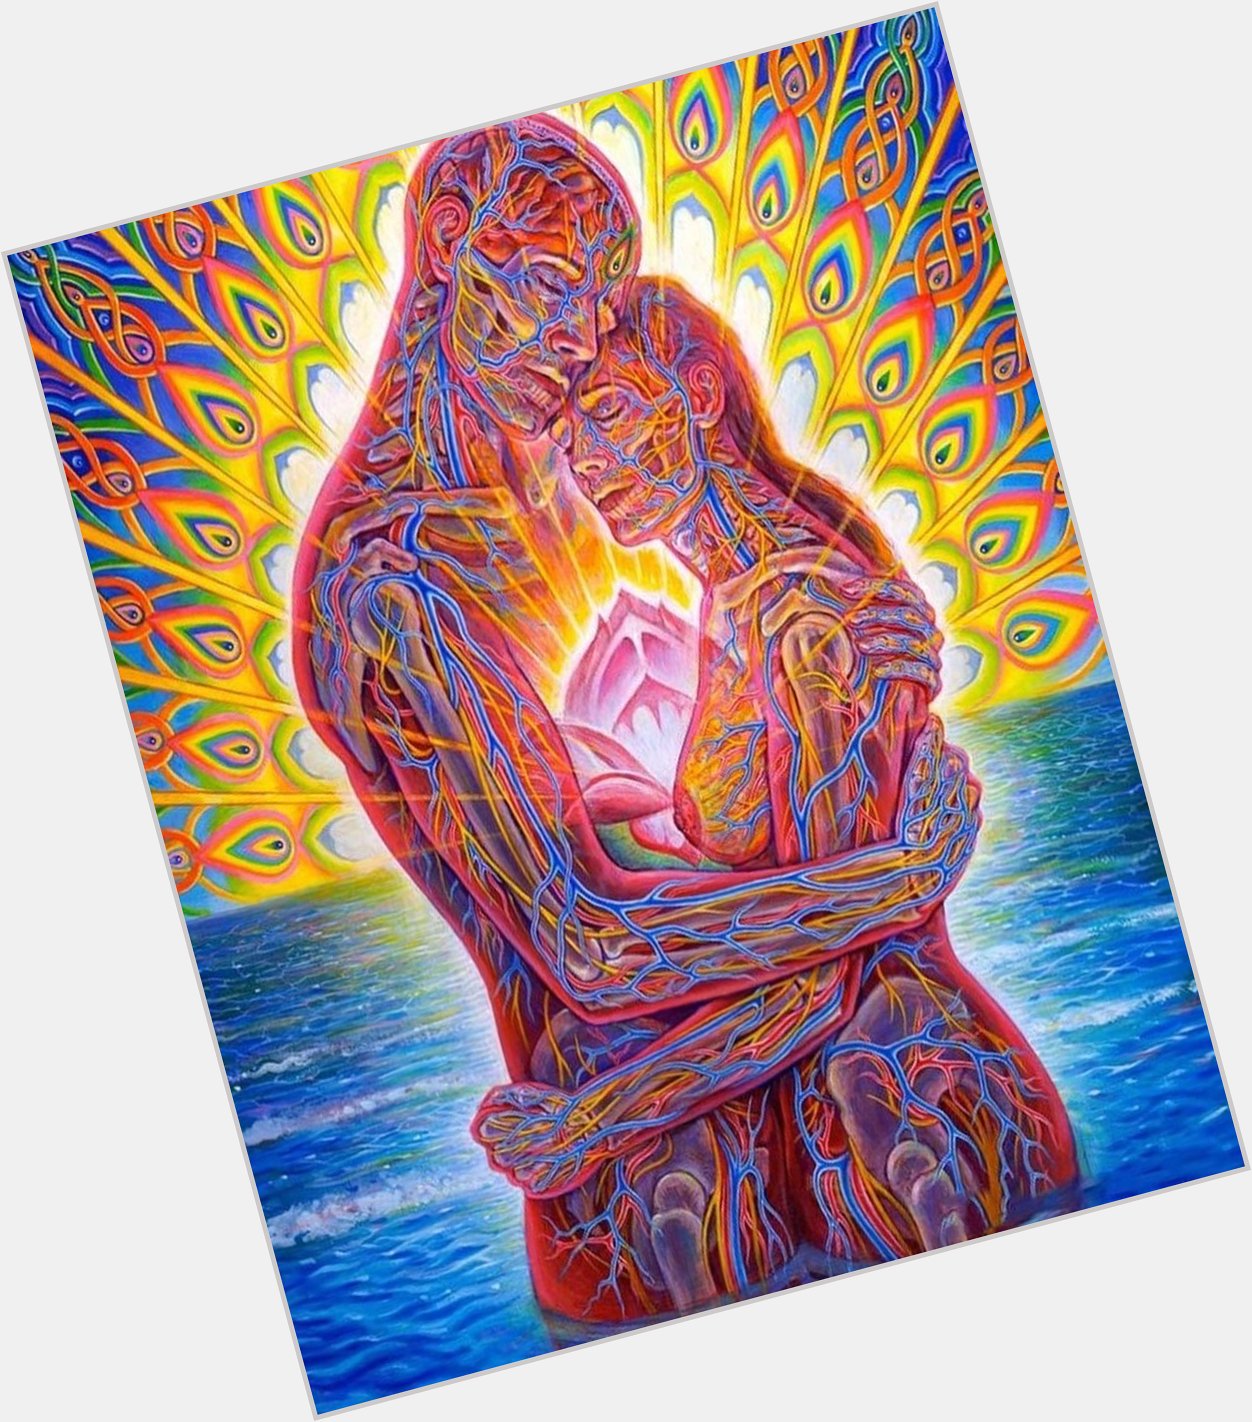 My fave artists bday is today happy bday @ alex grey  you\re divine 